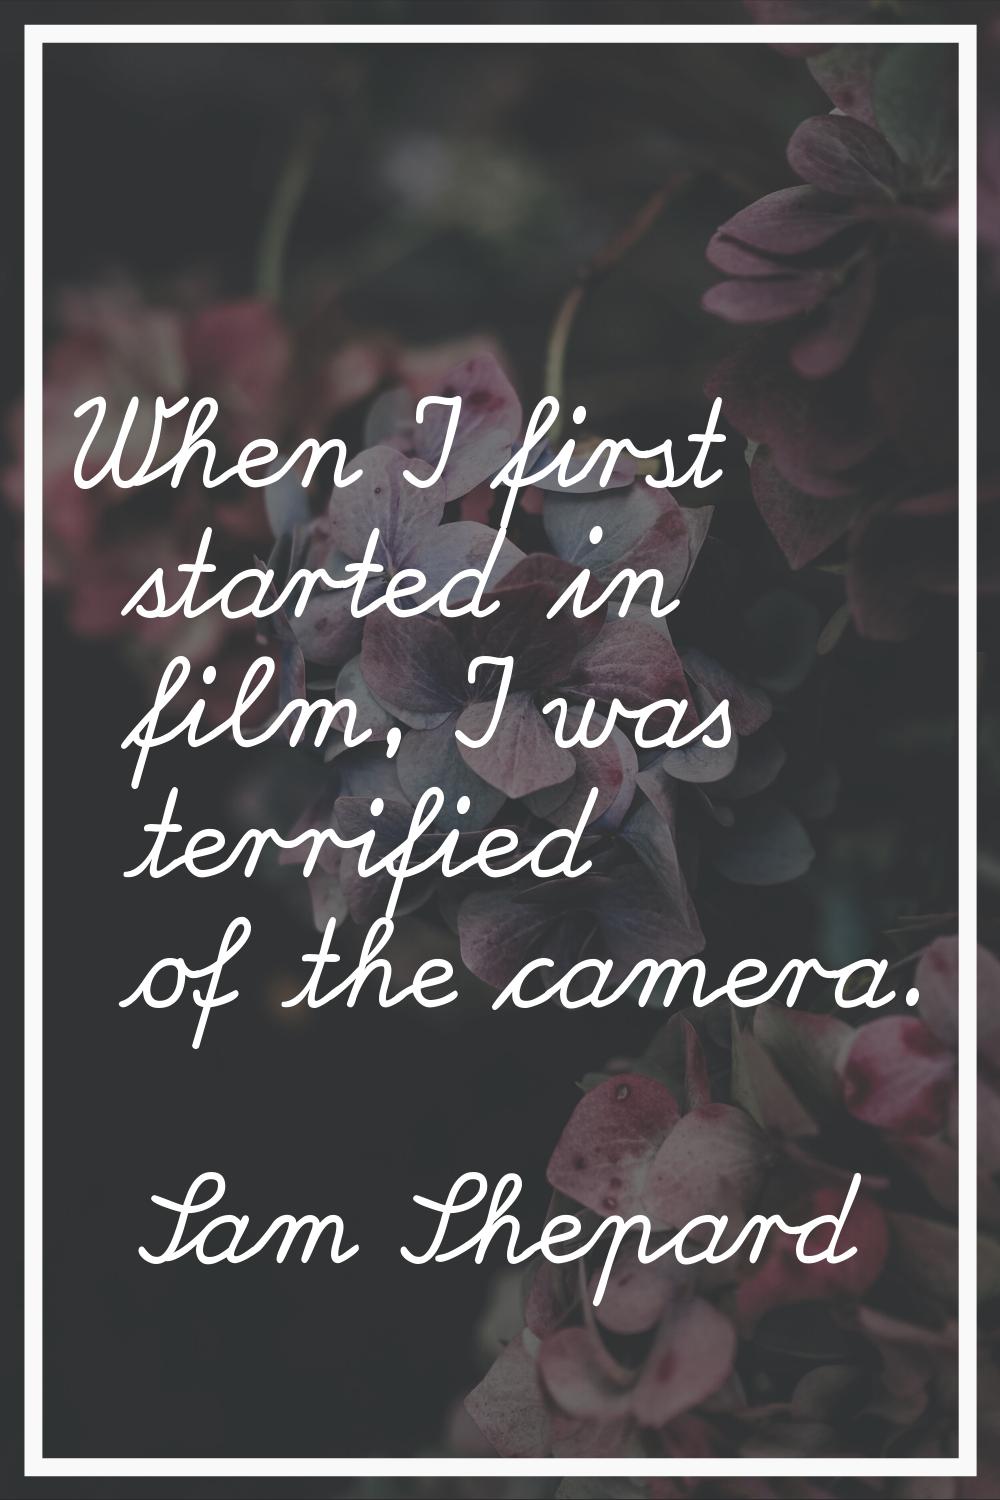 When I first started in film, I was terrified of the camera.